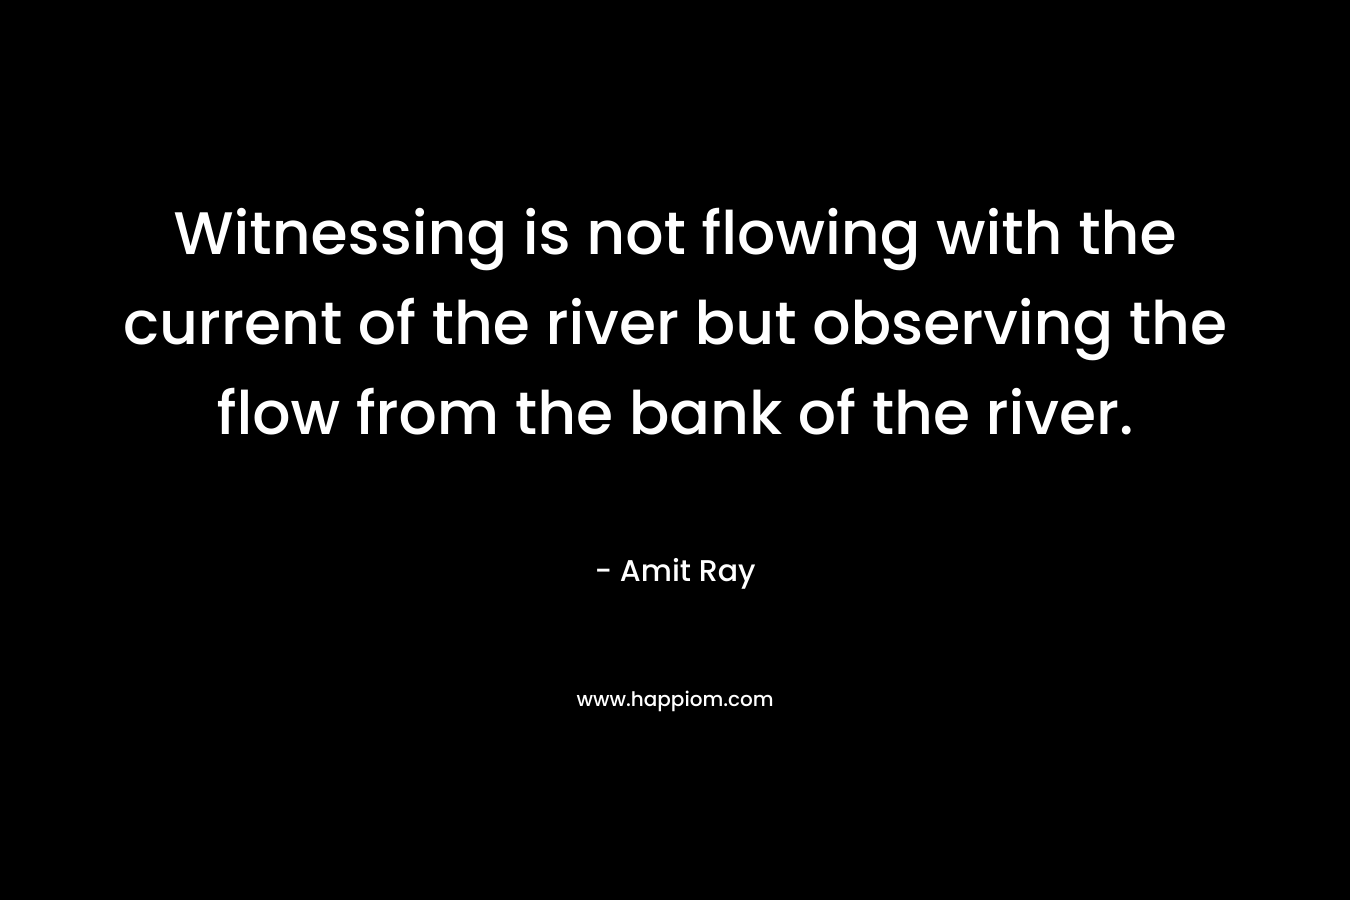 Witnessing is not flowing with the current of the river but observing the flow from the bank of the river. – Amit Ray